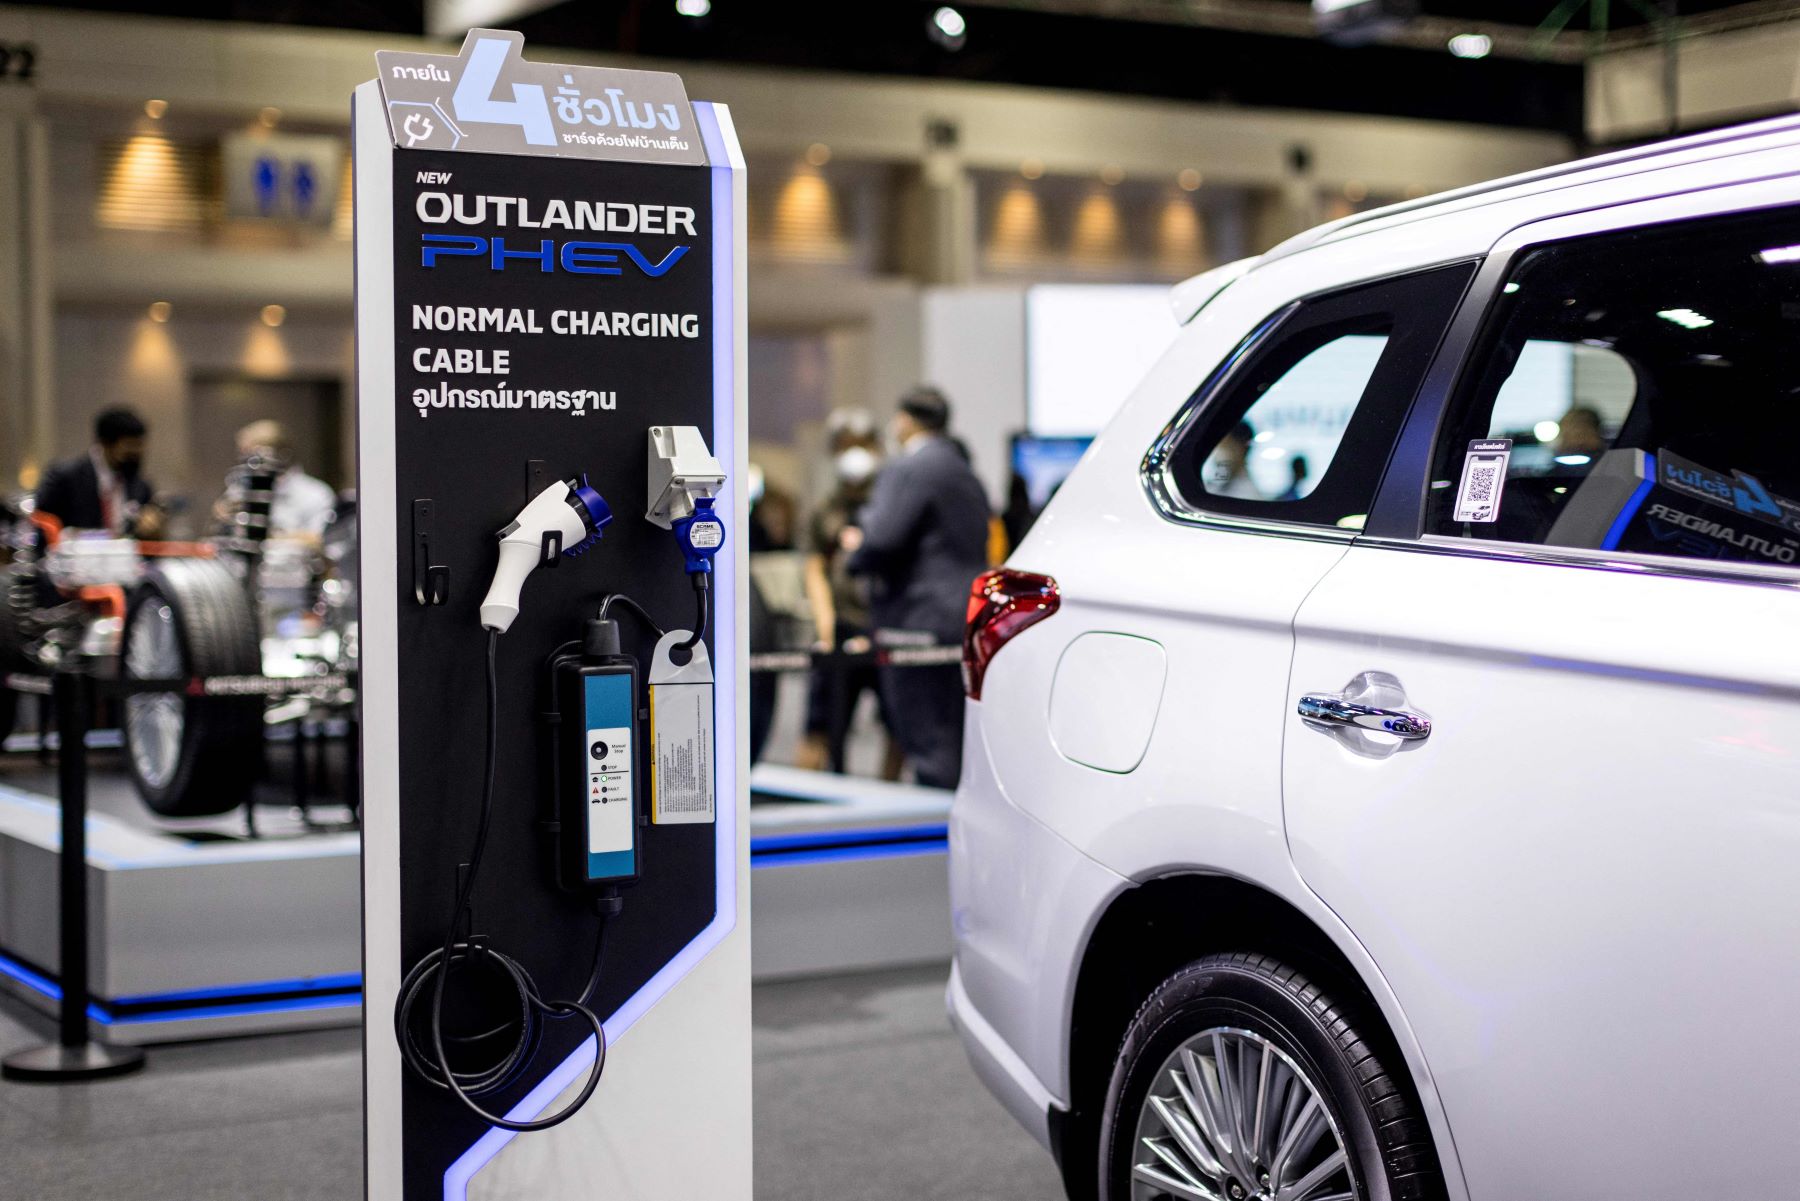 The charging cable of a Mitsubishi Outlander PHEV at the Thailand International Motor Expo 2021